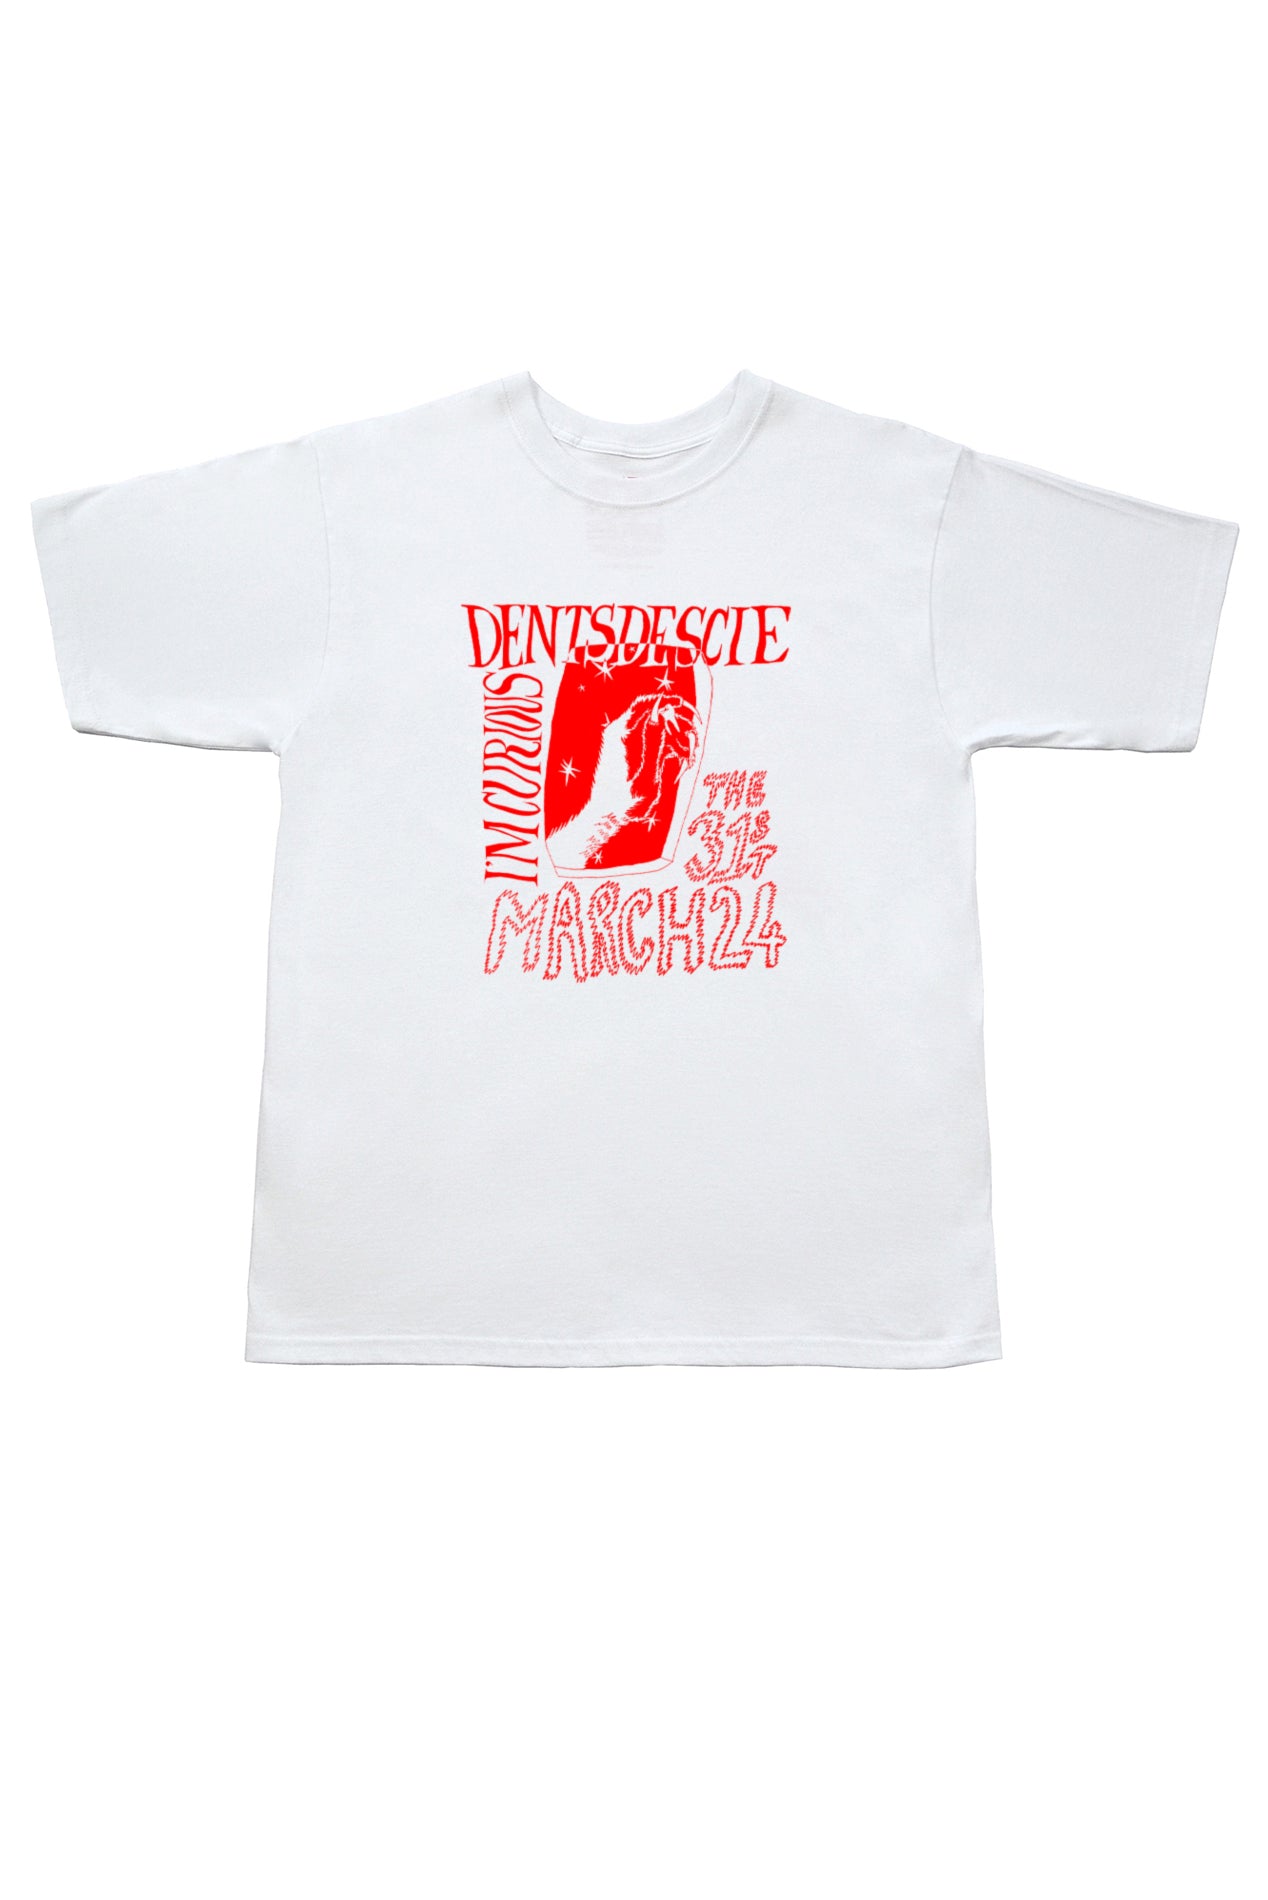 Dents de Scie® The wolf's tooth T-shirt blanc encre rouge